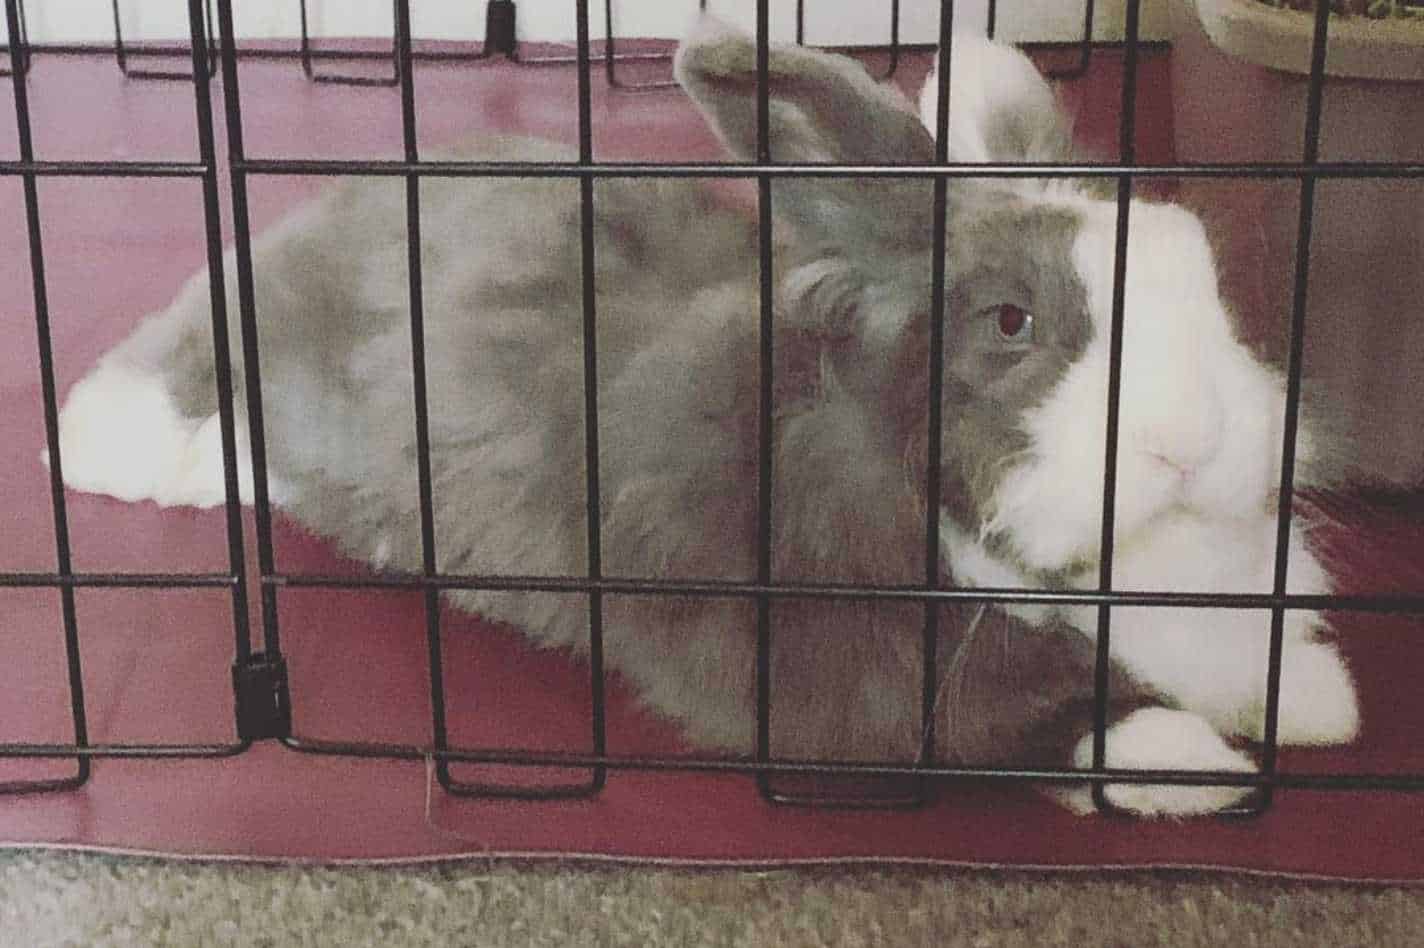 how to treat snuffles in rabbits